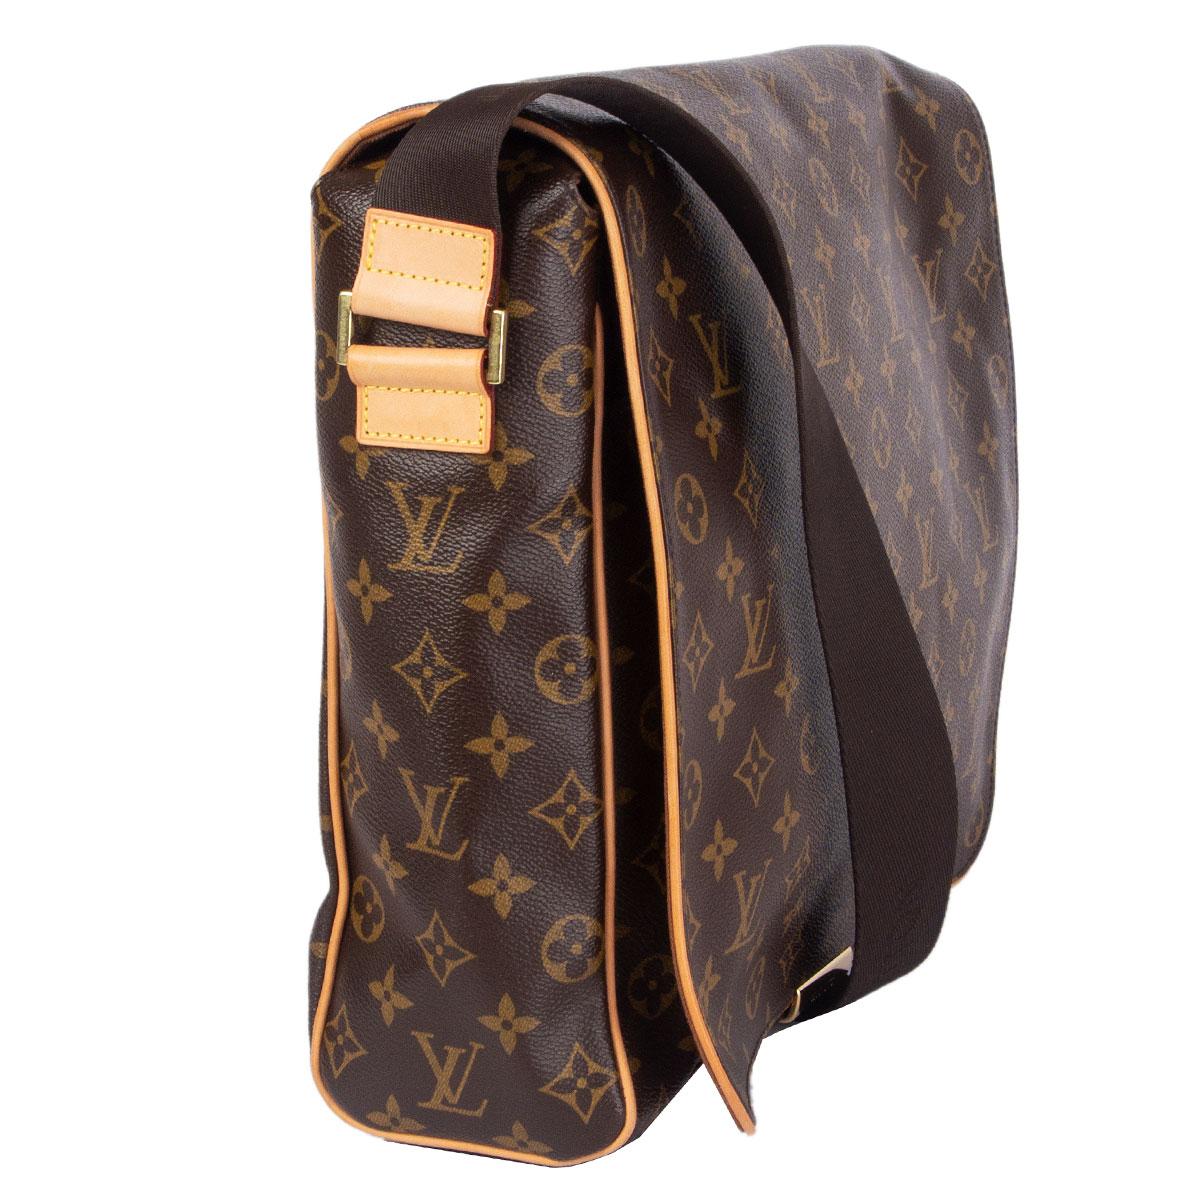 100% authentic Louis Vuitton Abbesses Messenger Bag in brown and camel monogram canvas featuring gold-tone hardware. Opens with a flap and is lined in brown canvas with one zip pocket against the back and two open pockets against the front. Has two